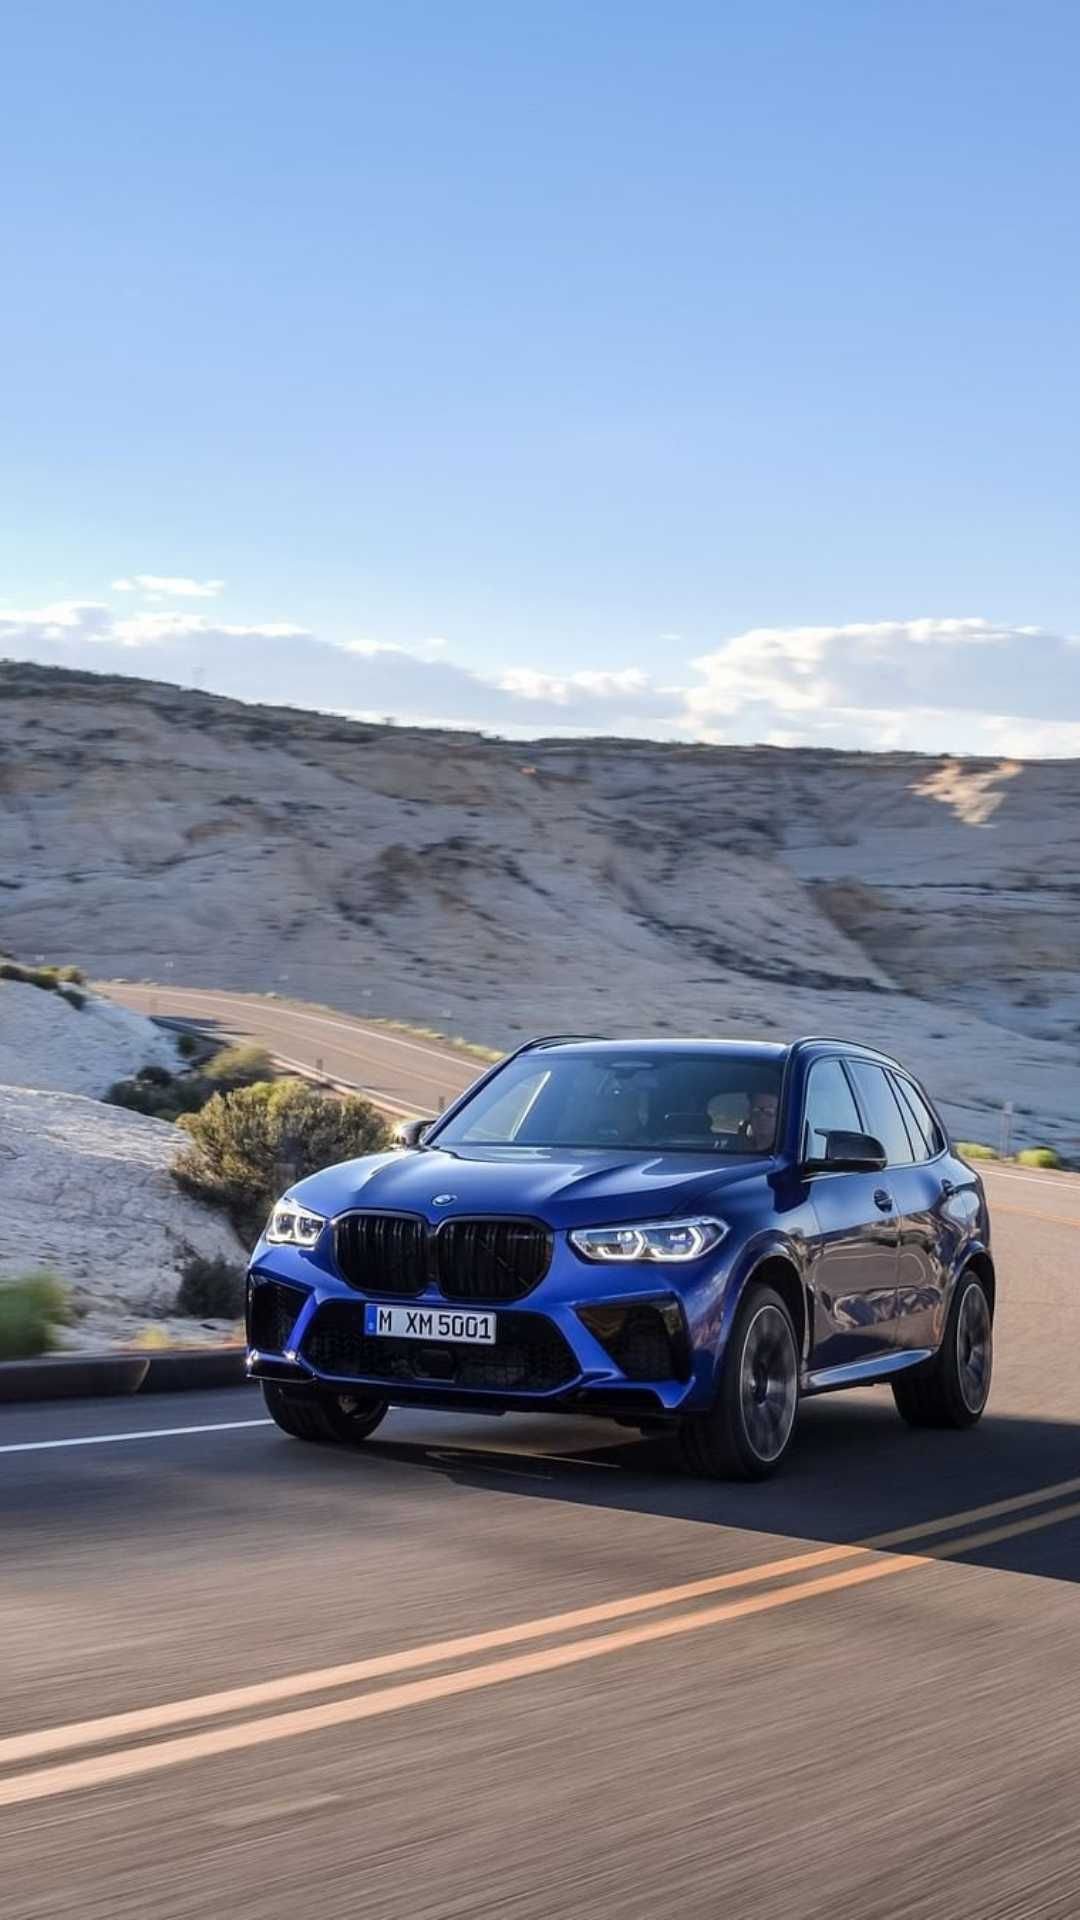 Blue bmw x5 m competition Wallpaper Download